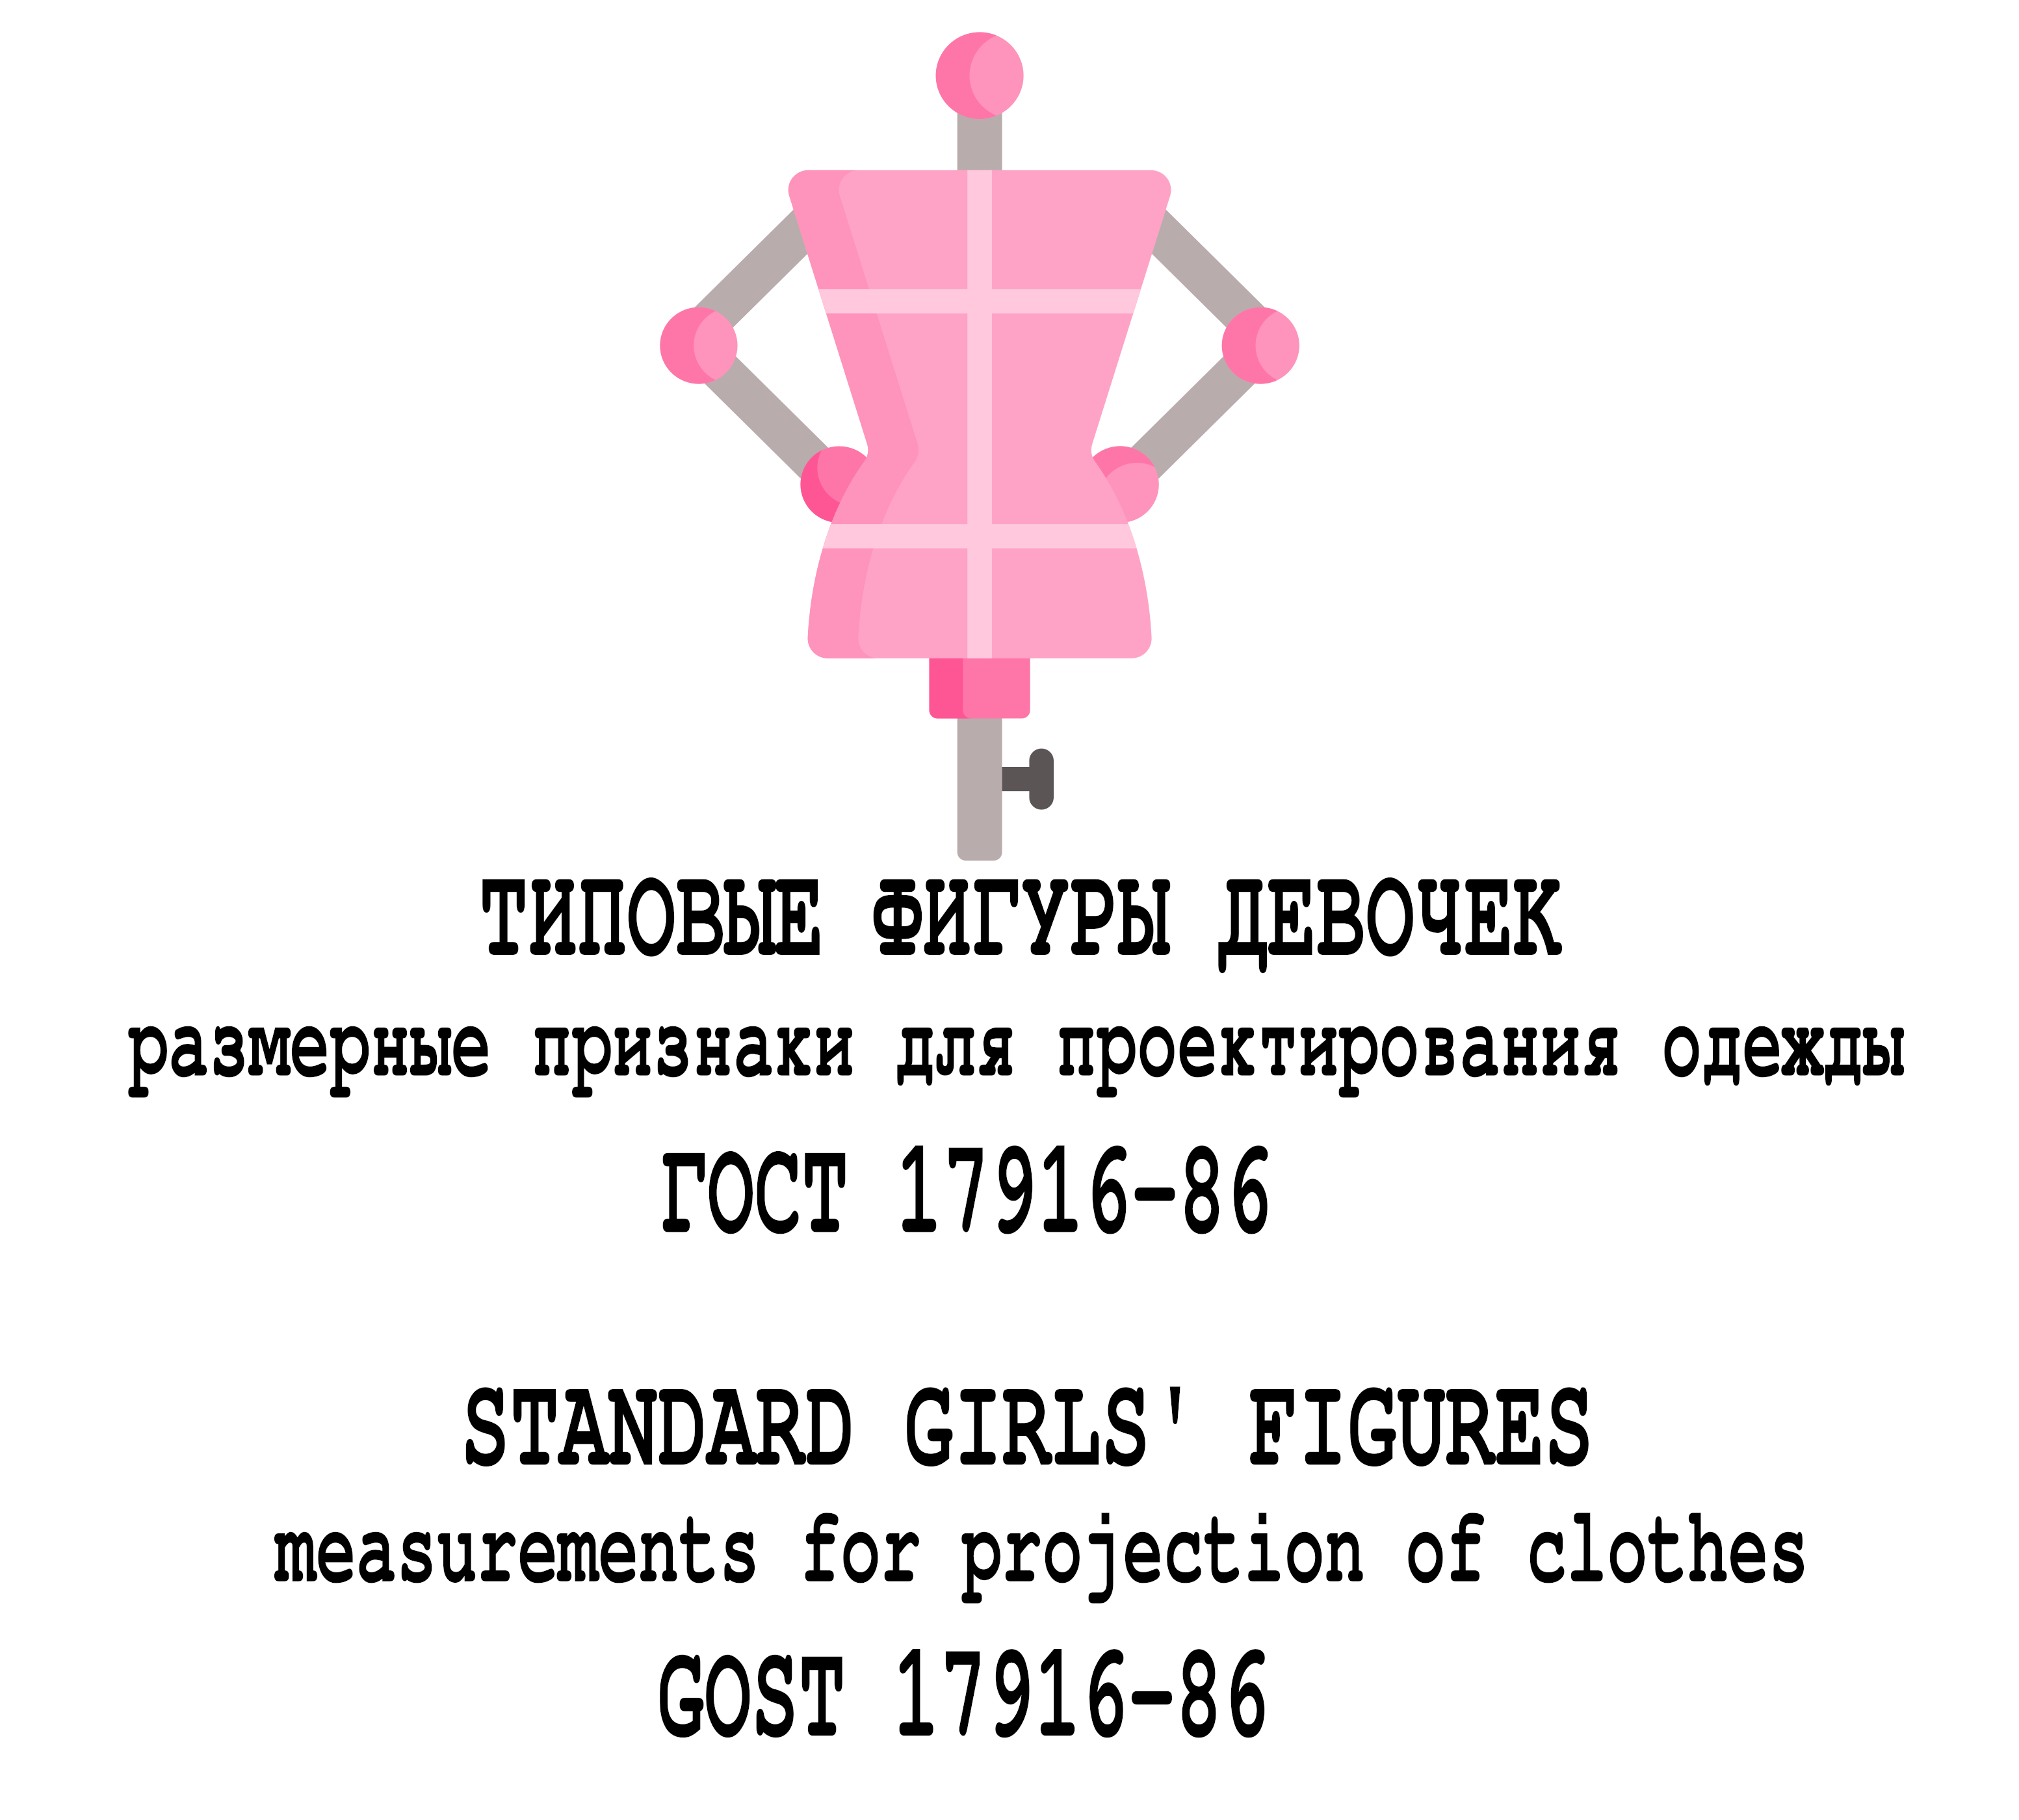 Standard girls' figures. Measurements for projection of clothes. GOST 17916-86 (russian language)